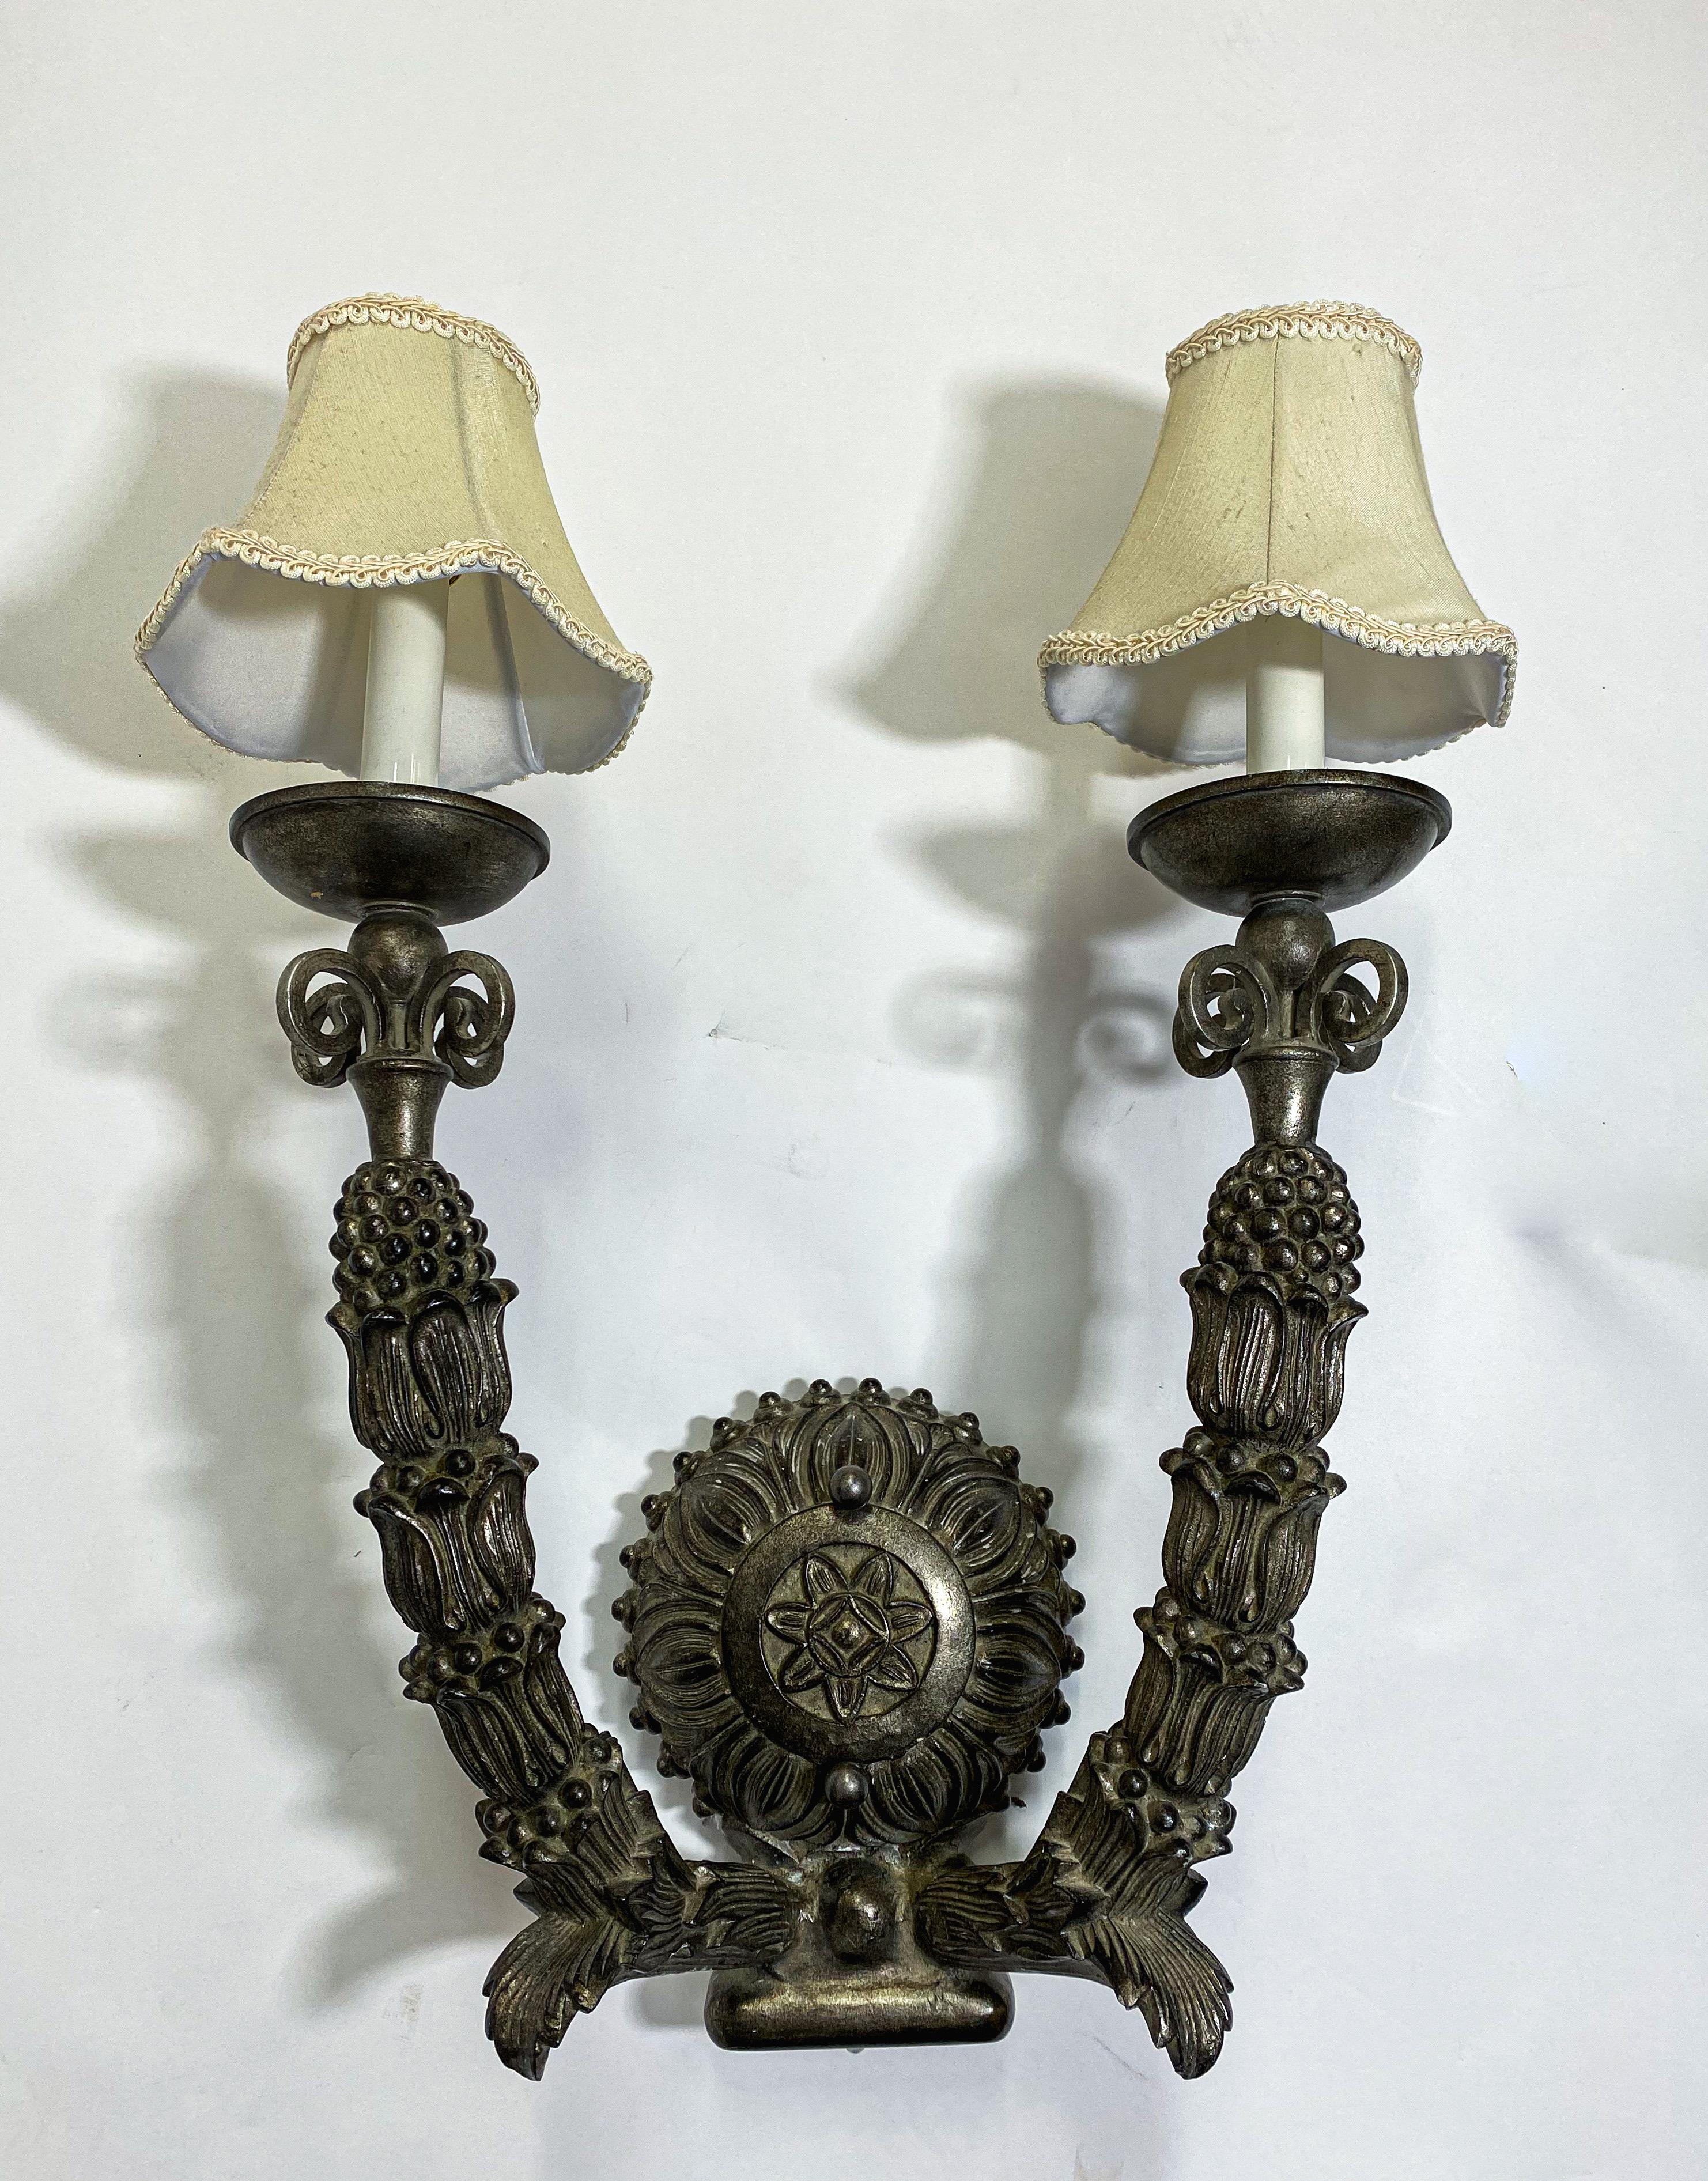 An exceptional Neo Gothic large size wall scone. The wall sconce has two large arms, each arm ending in a candelabra light with a custom made French style shade. The iron cast sconce features beautiful patterns and details. Each arms is finely